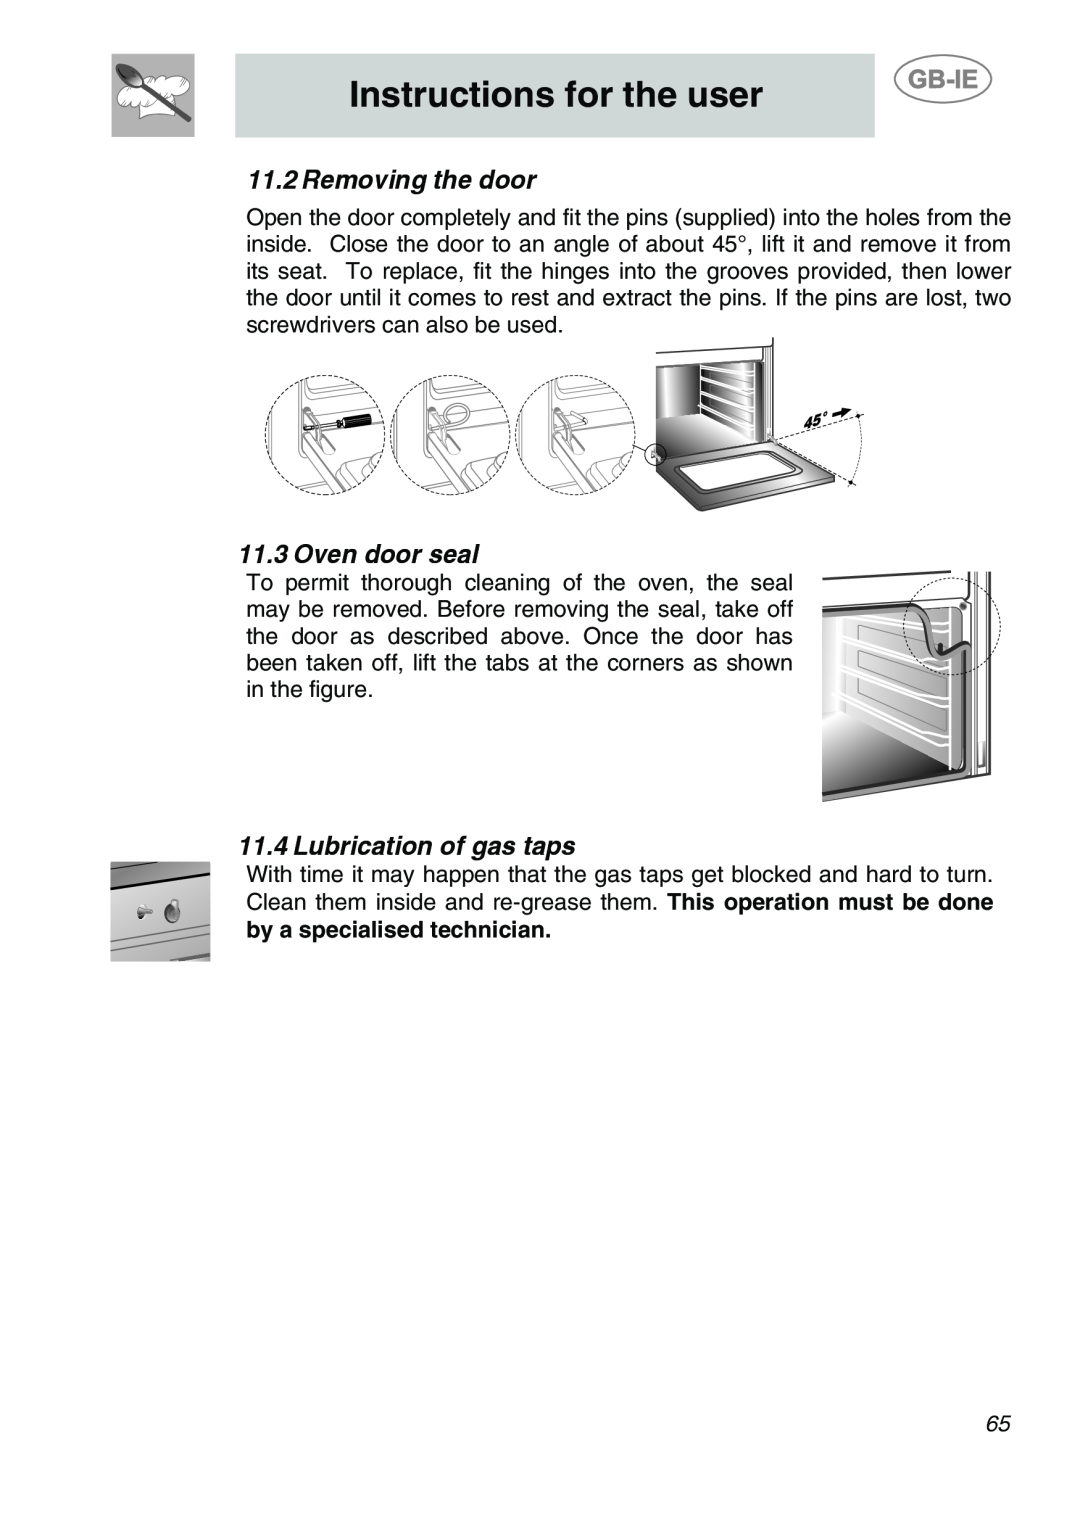 Smeg A1-6 manual Removing the door, Oven door seal, Lubrication of gas taps, Instructions for the user 